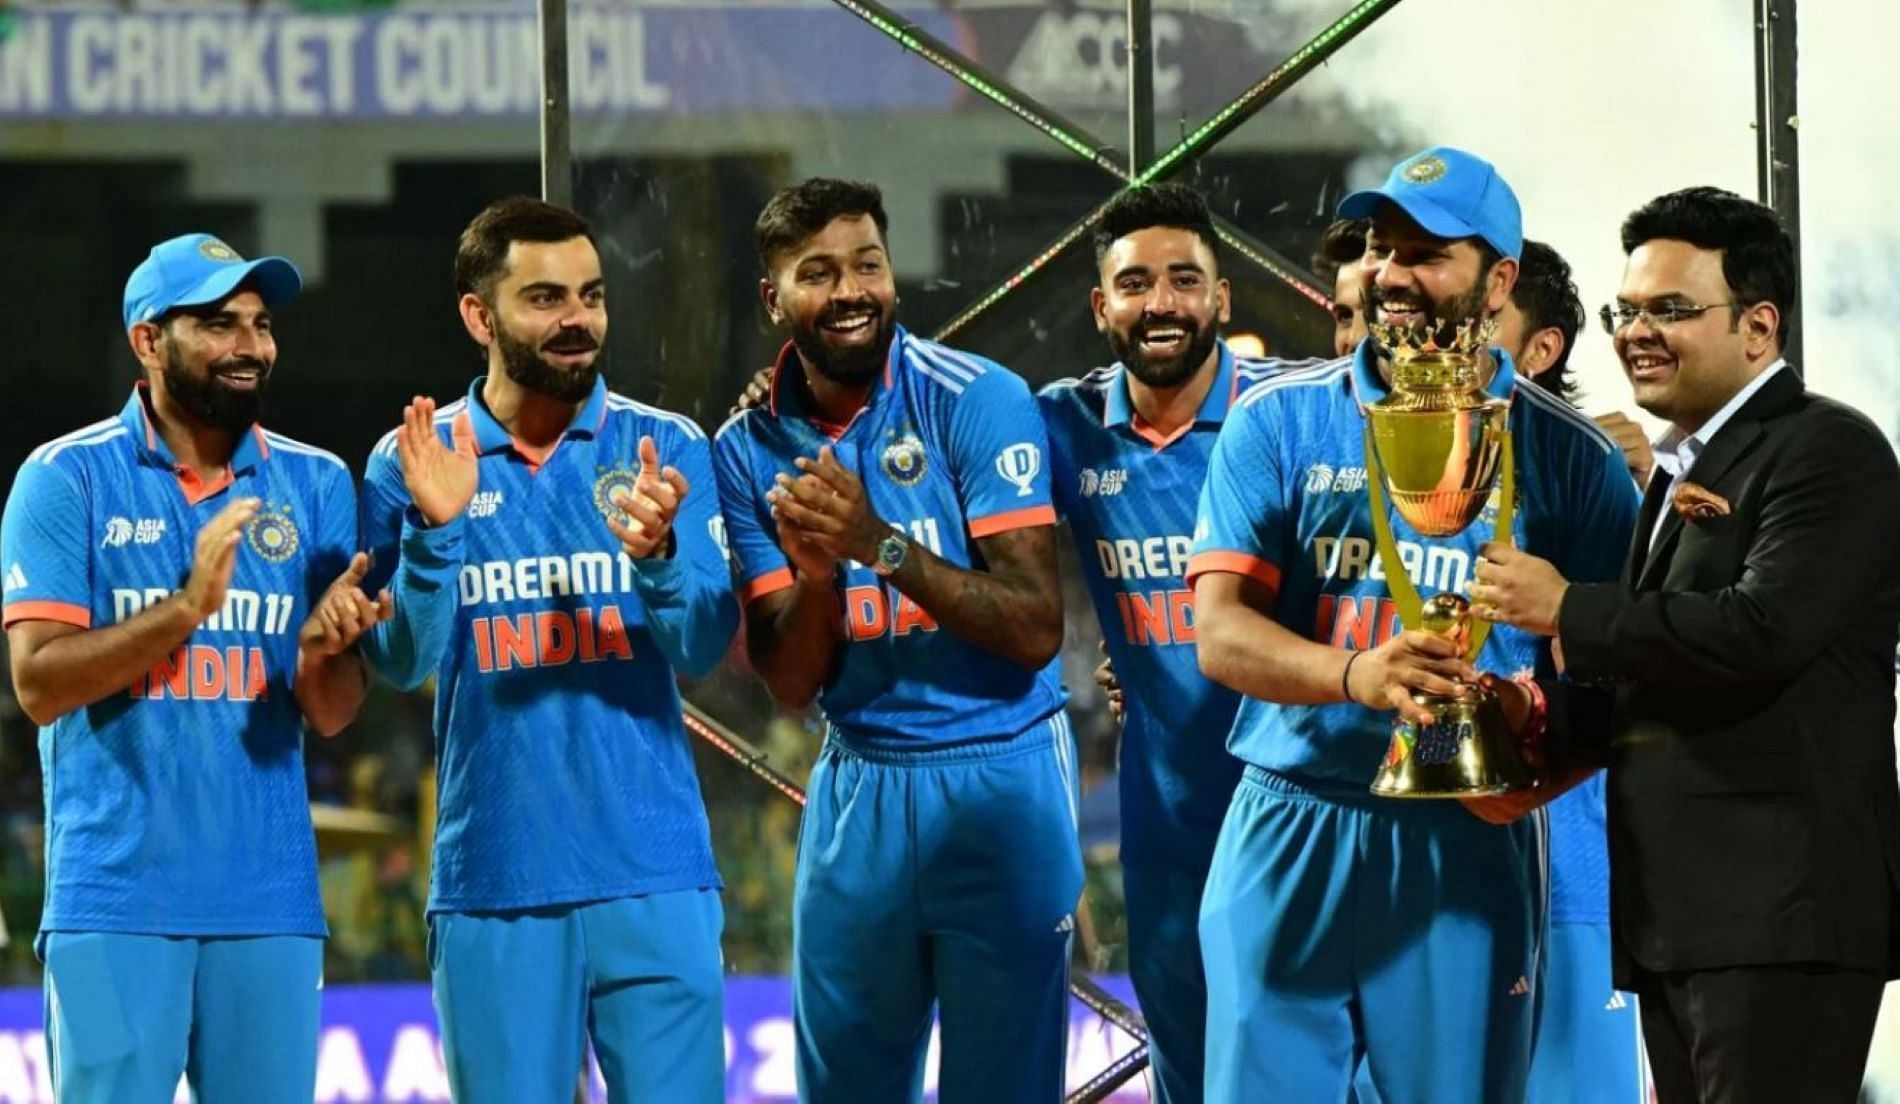 India demolished Sri Lanka to win the Asia Cup less than two months back.